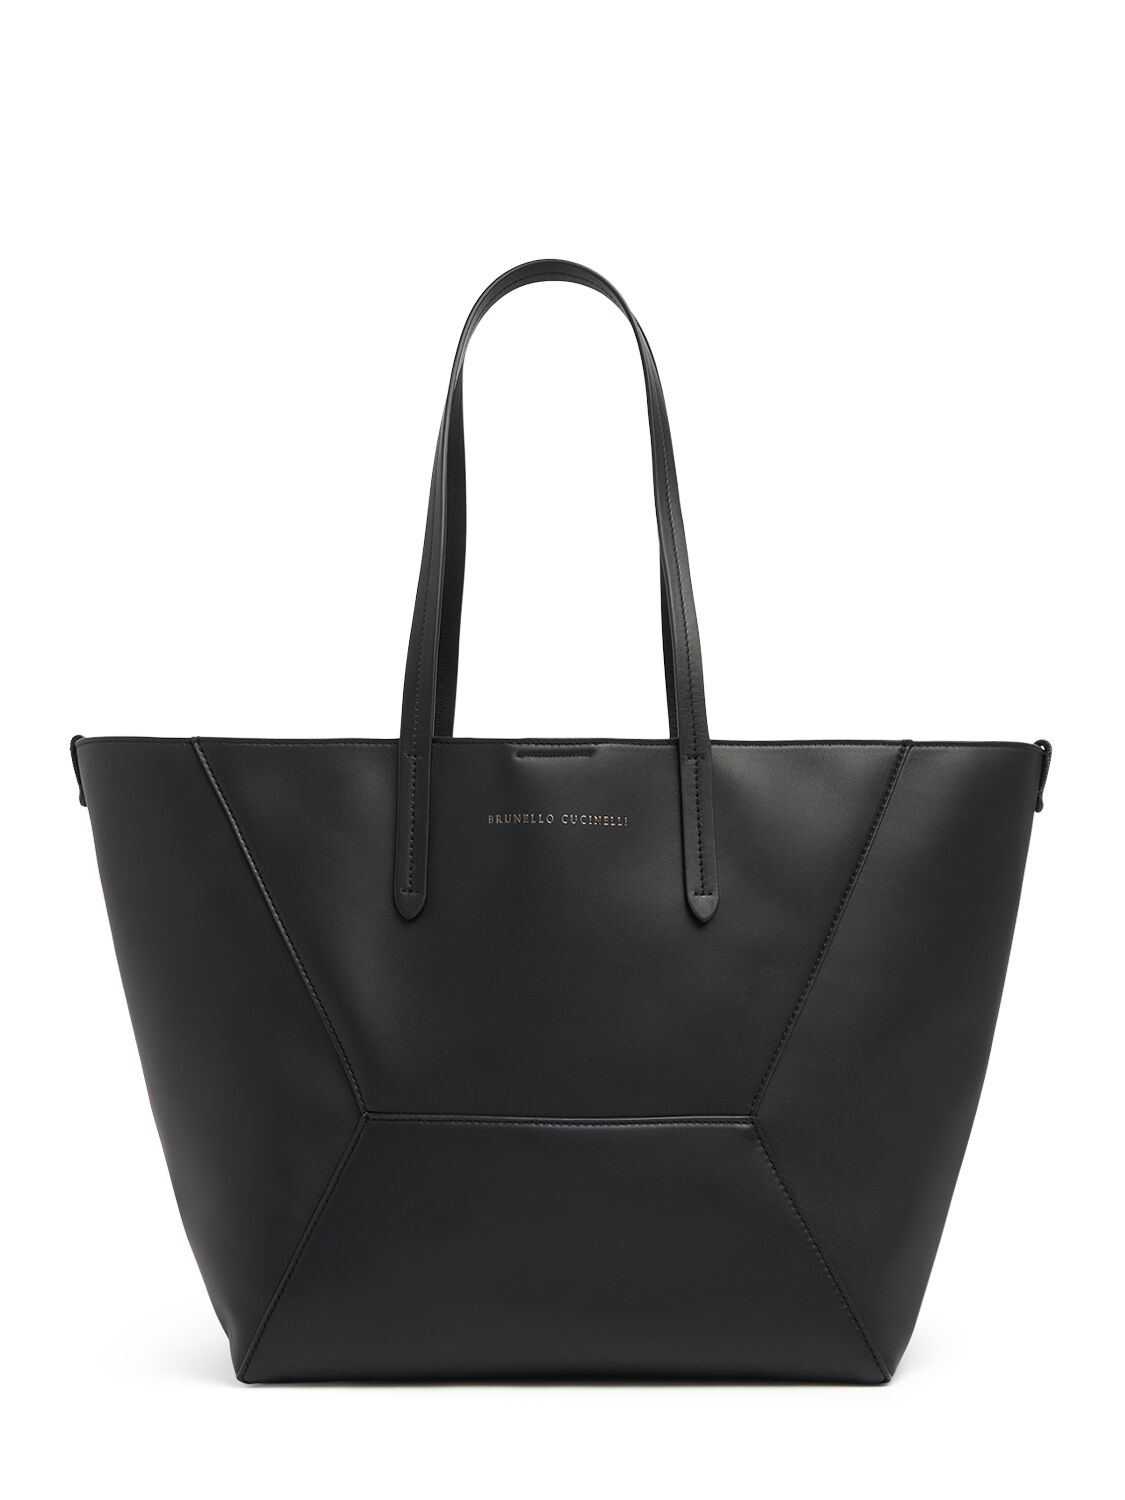 Brunello Cucinelli Softy Leather Tote Bag In Black